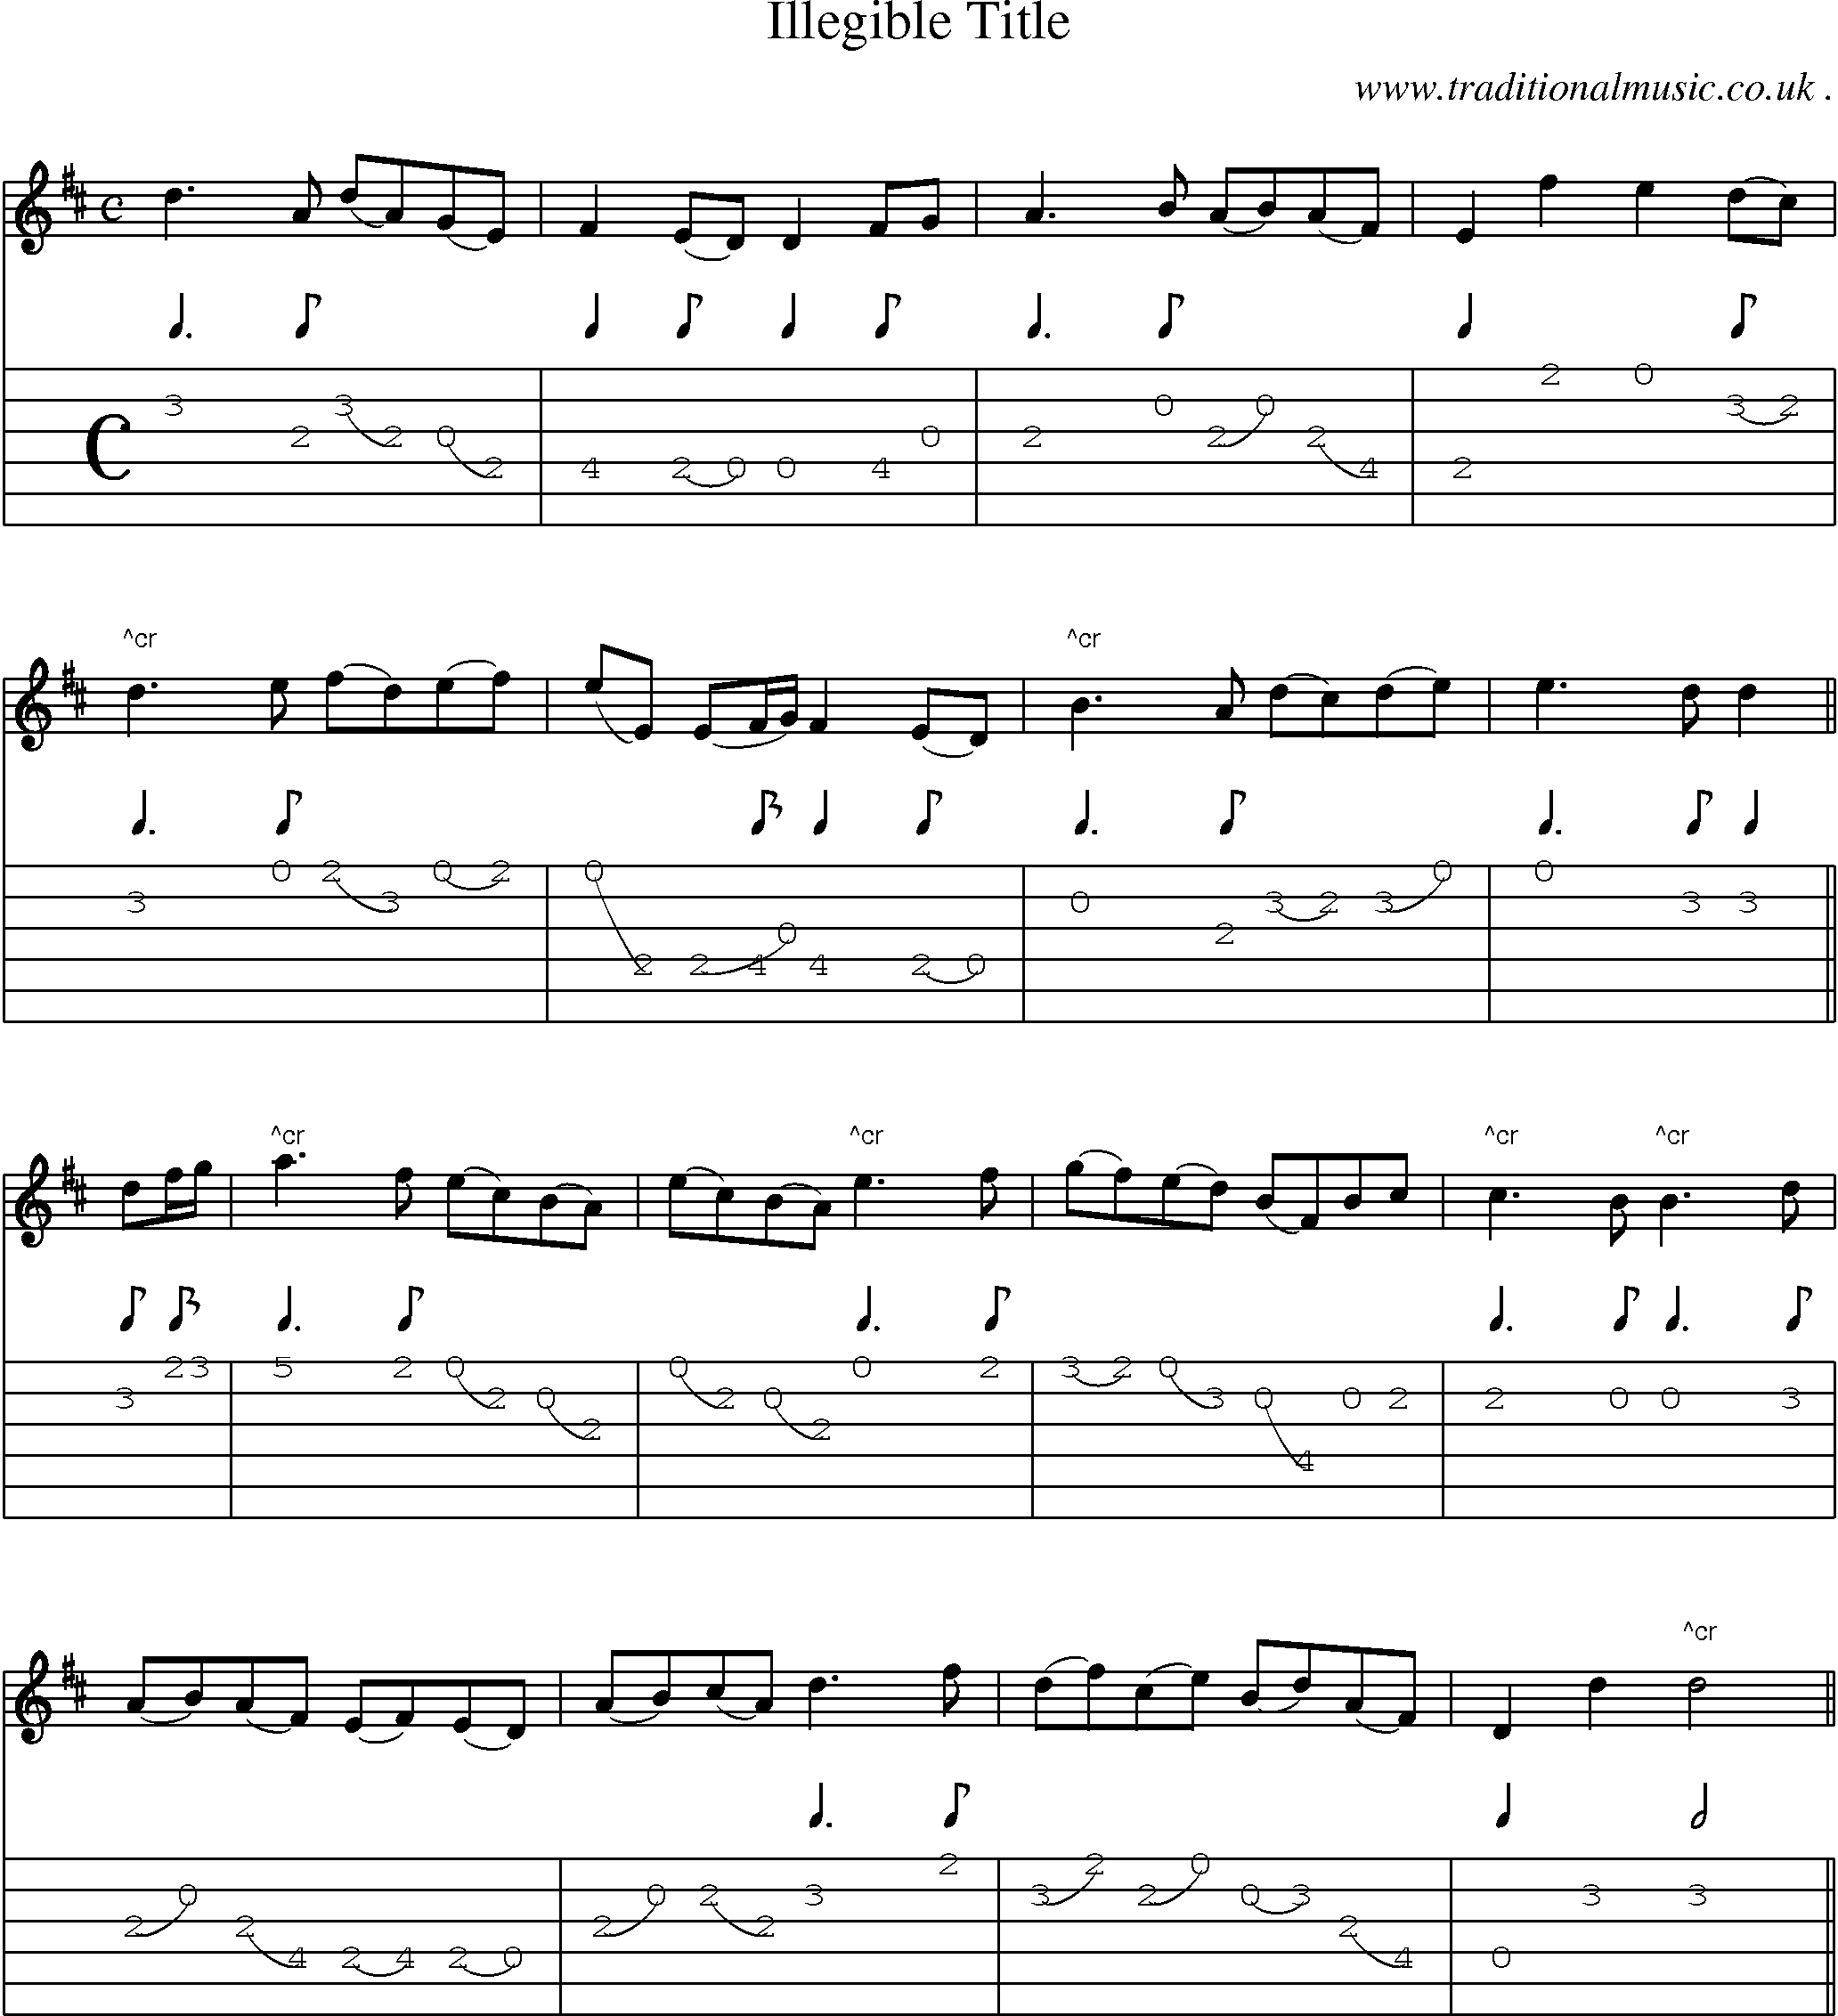 Sheet-Music and Guitar Tabs for Illegible Title